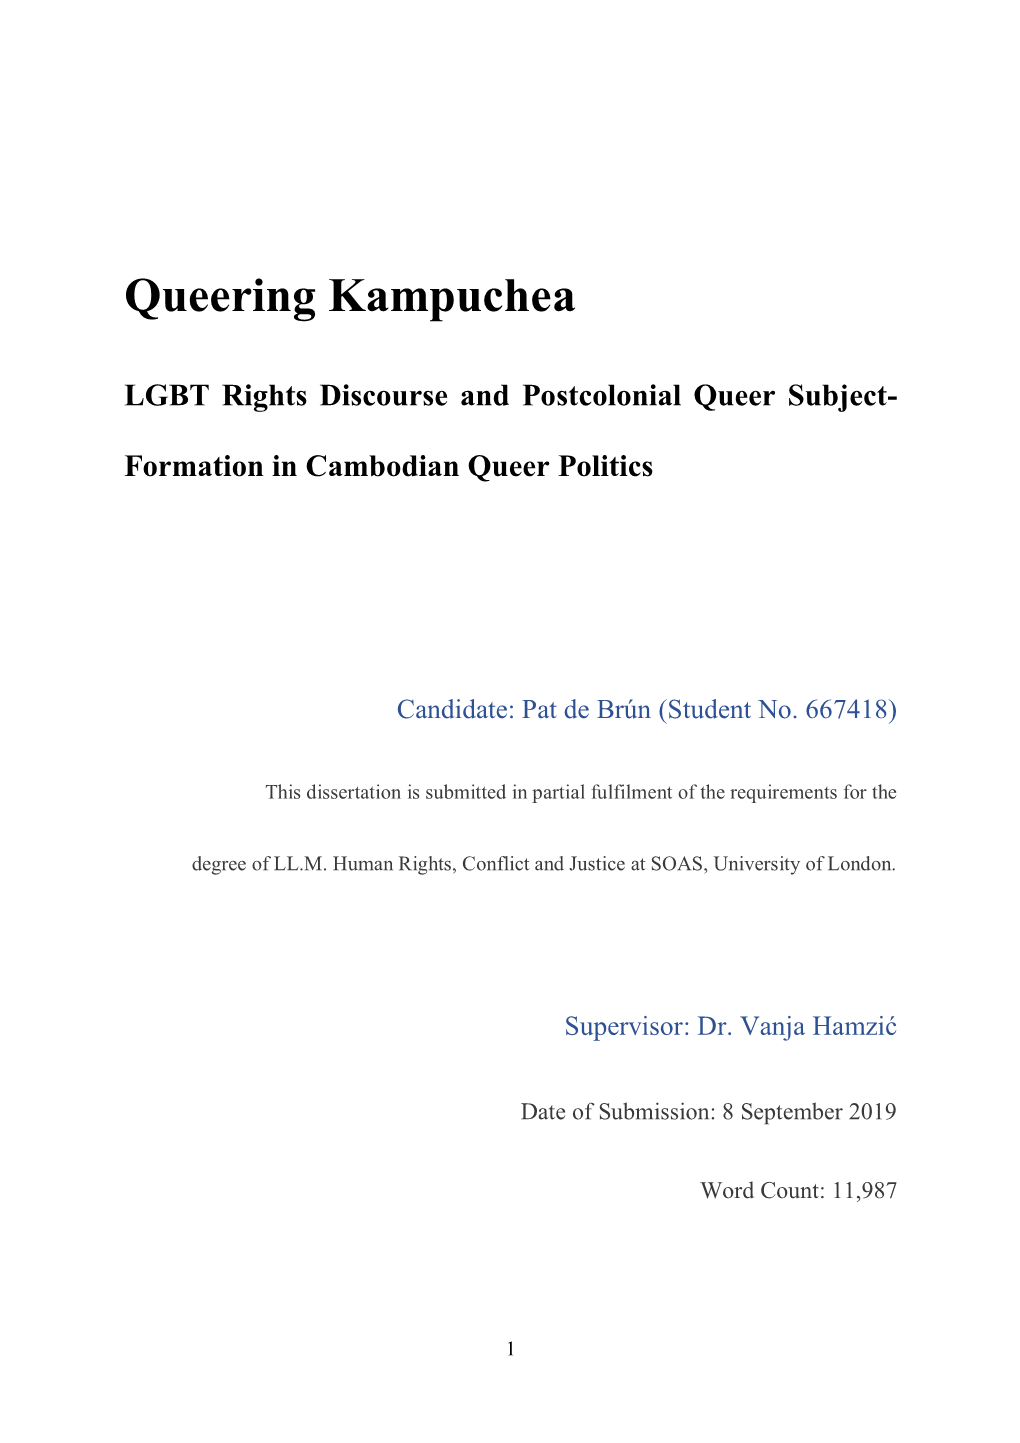 LGBT Rights Discourse and Postcolonial Queer Subject